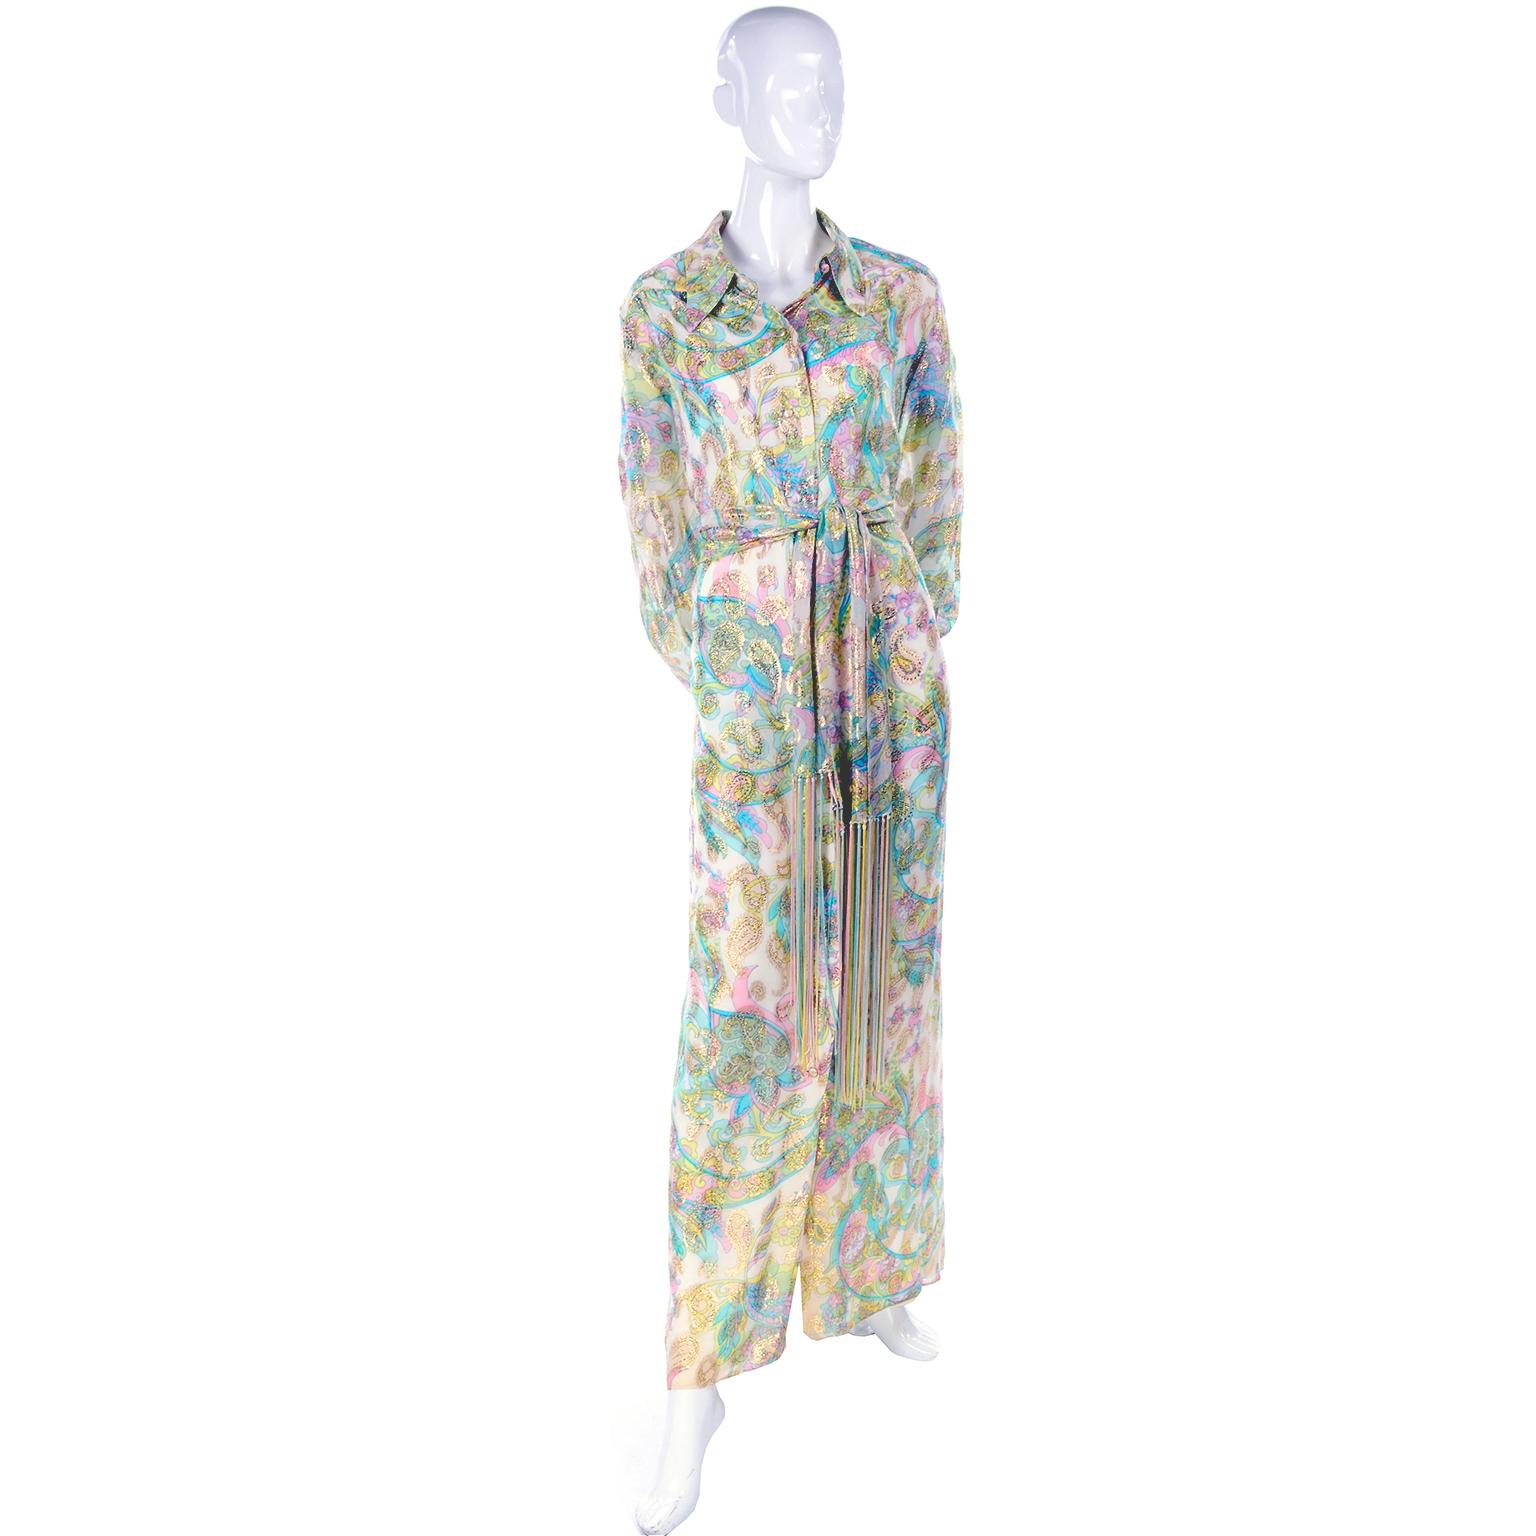 This beautiful vintage dress has sparkling gold metallic paisley designs atop swirling floral designs in pastel green, yellow, blue and pink! Made by Nat Kaplan Couture in the 1970's, this long shirt dress buttons entirely down the front, and has